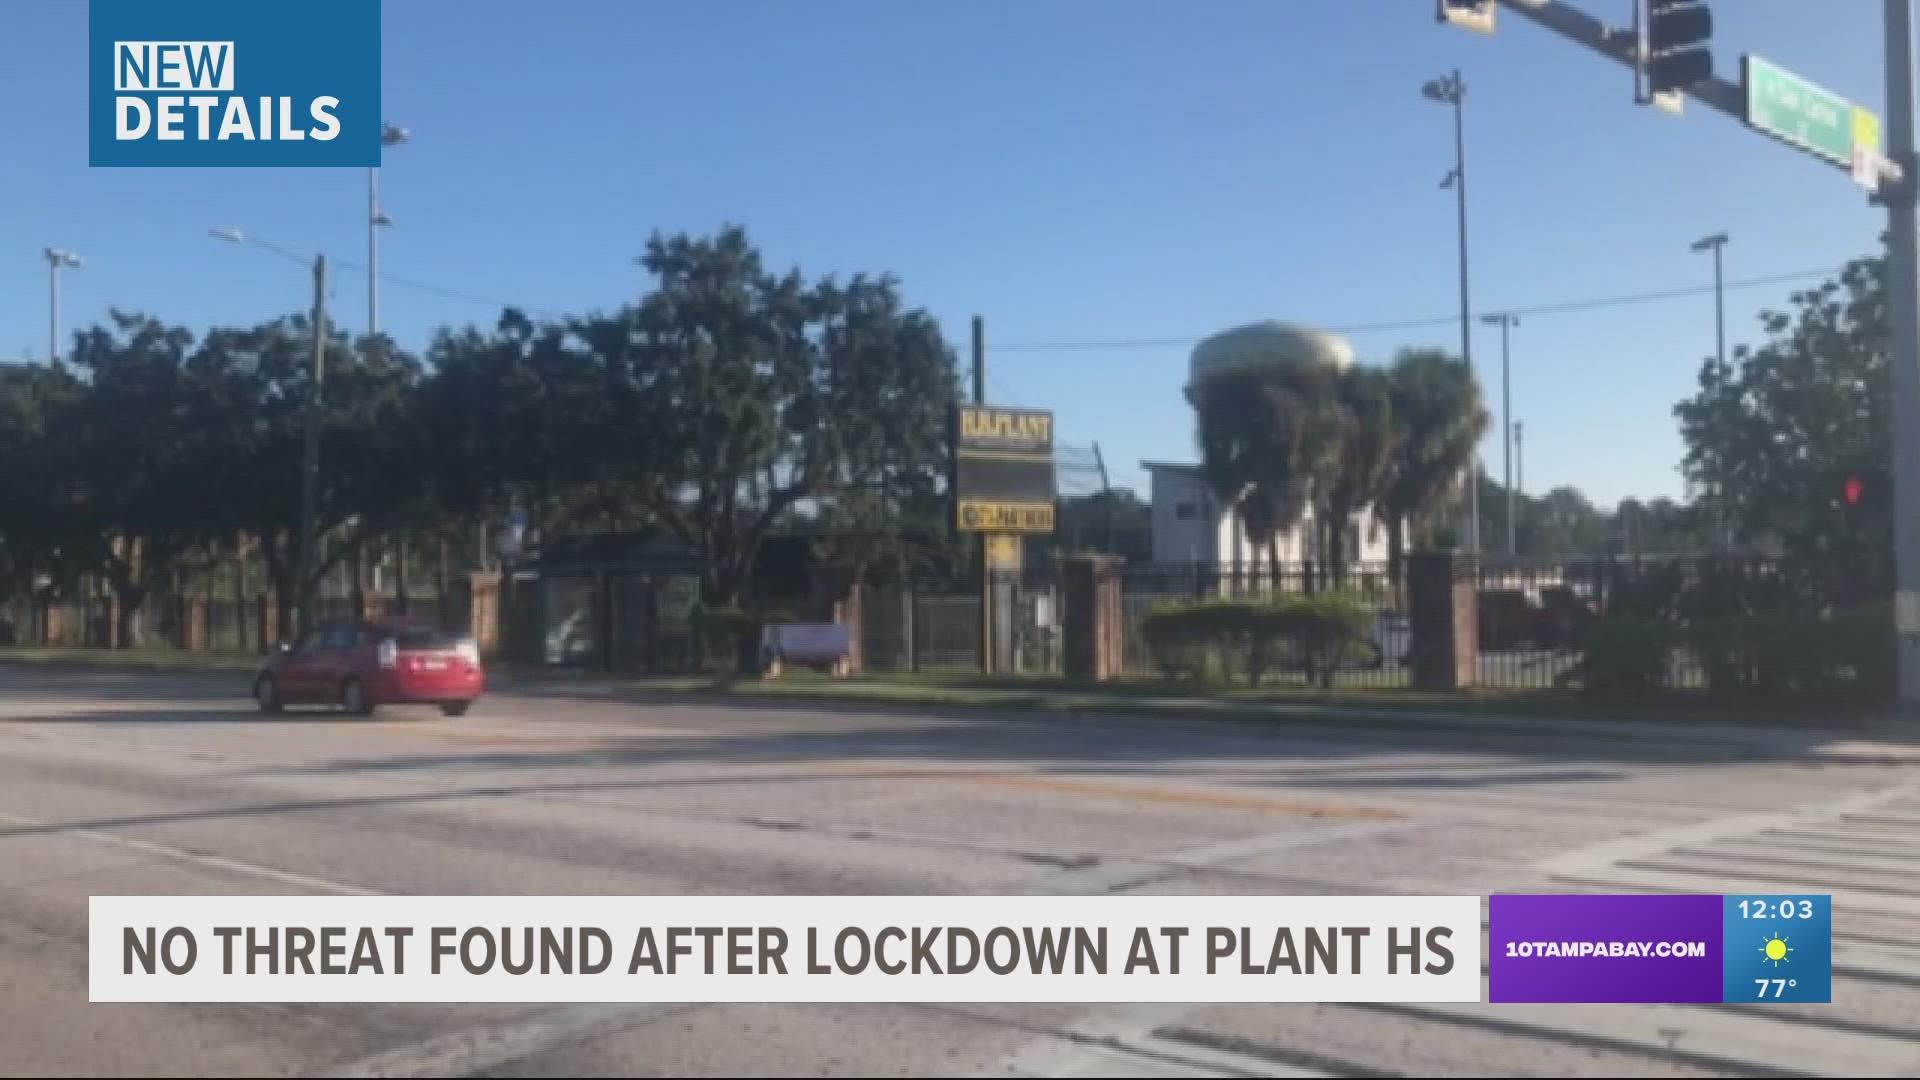 Tampa police said they received a call about a suspicious person walking towards the school, possibly with a weapon.